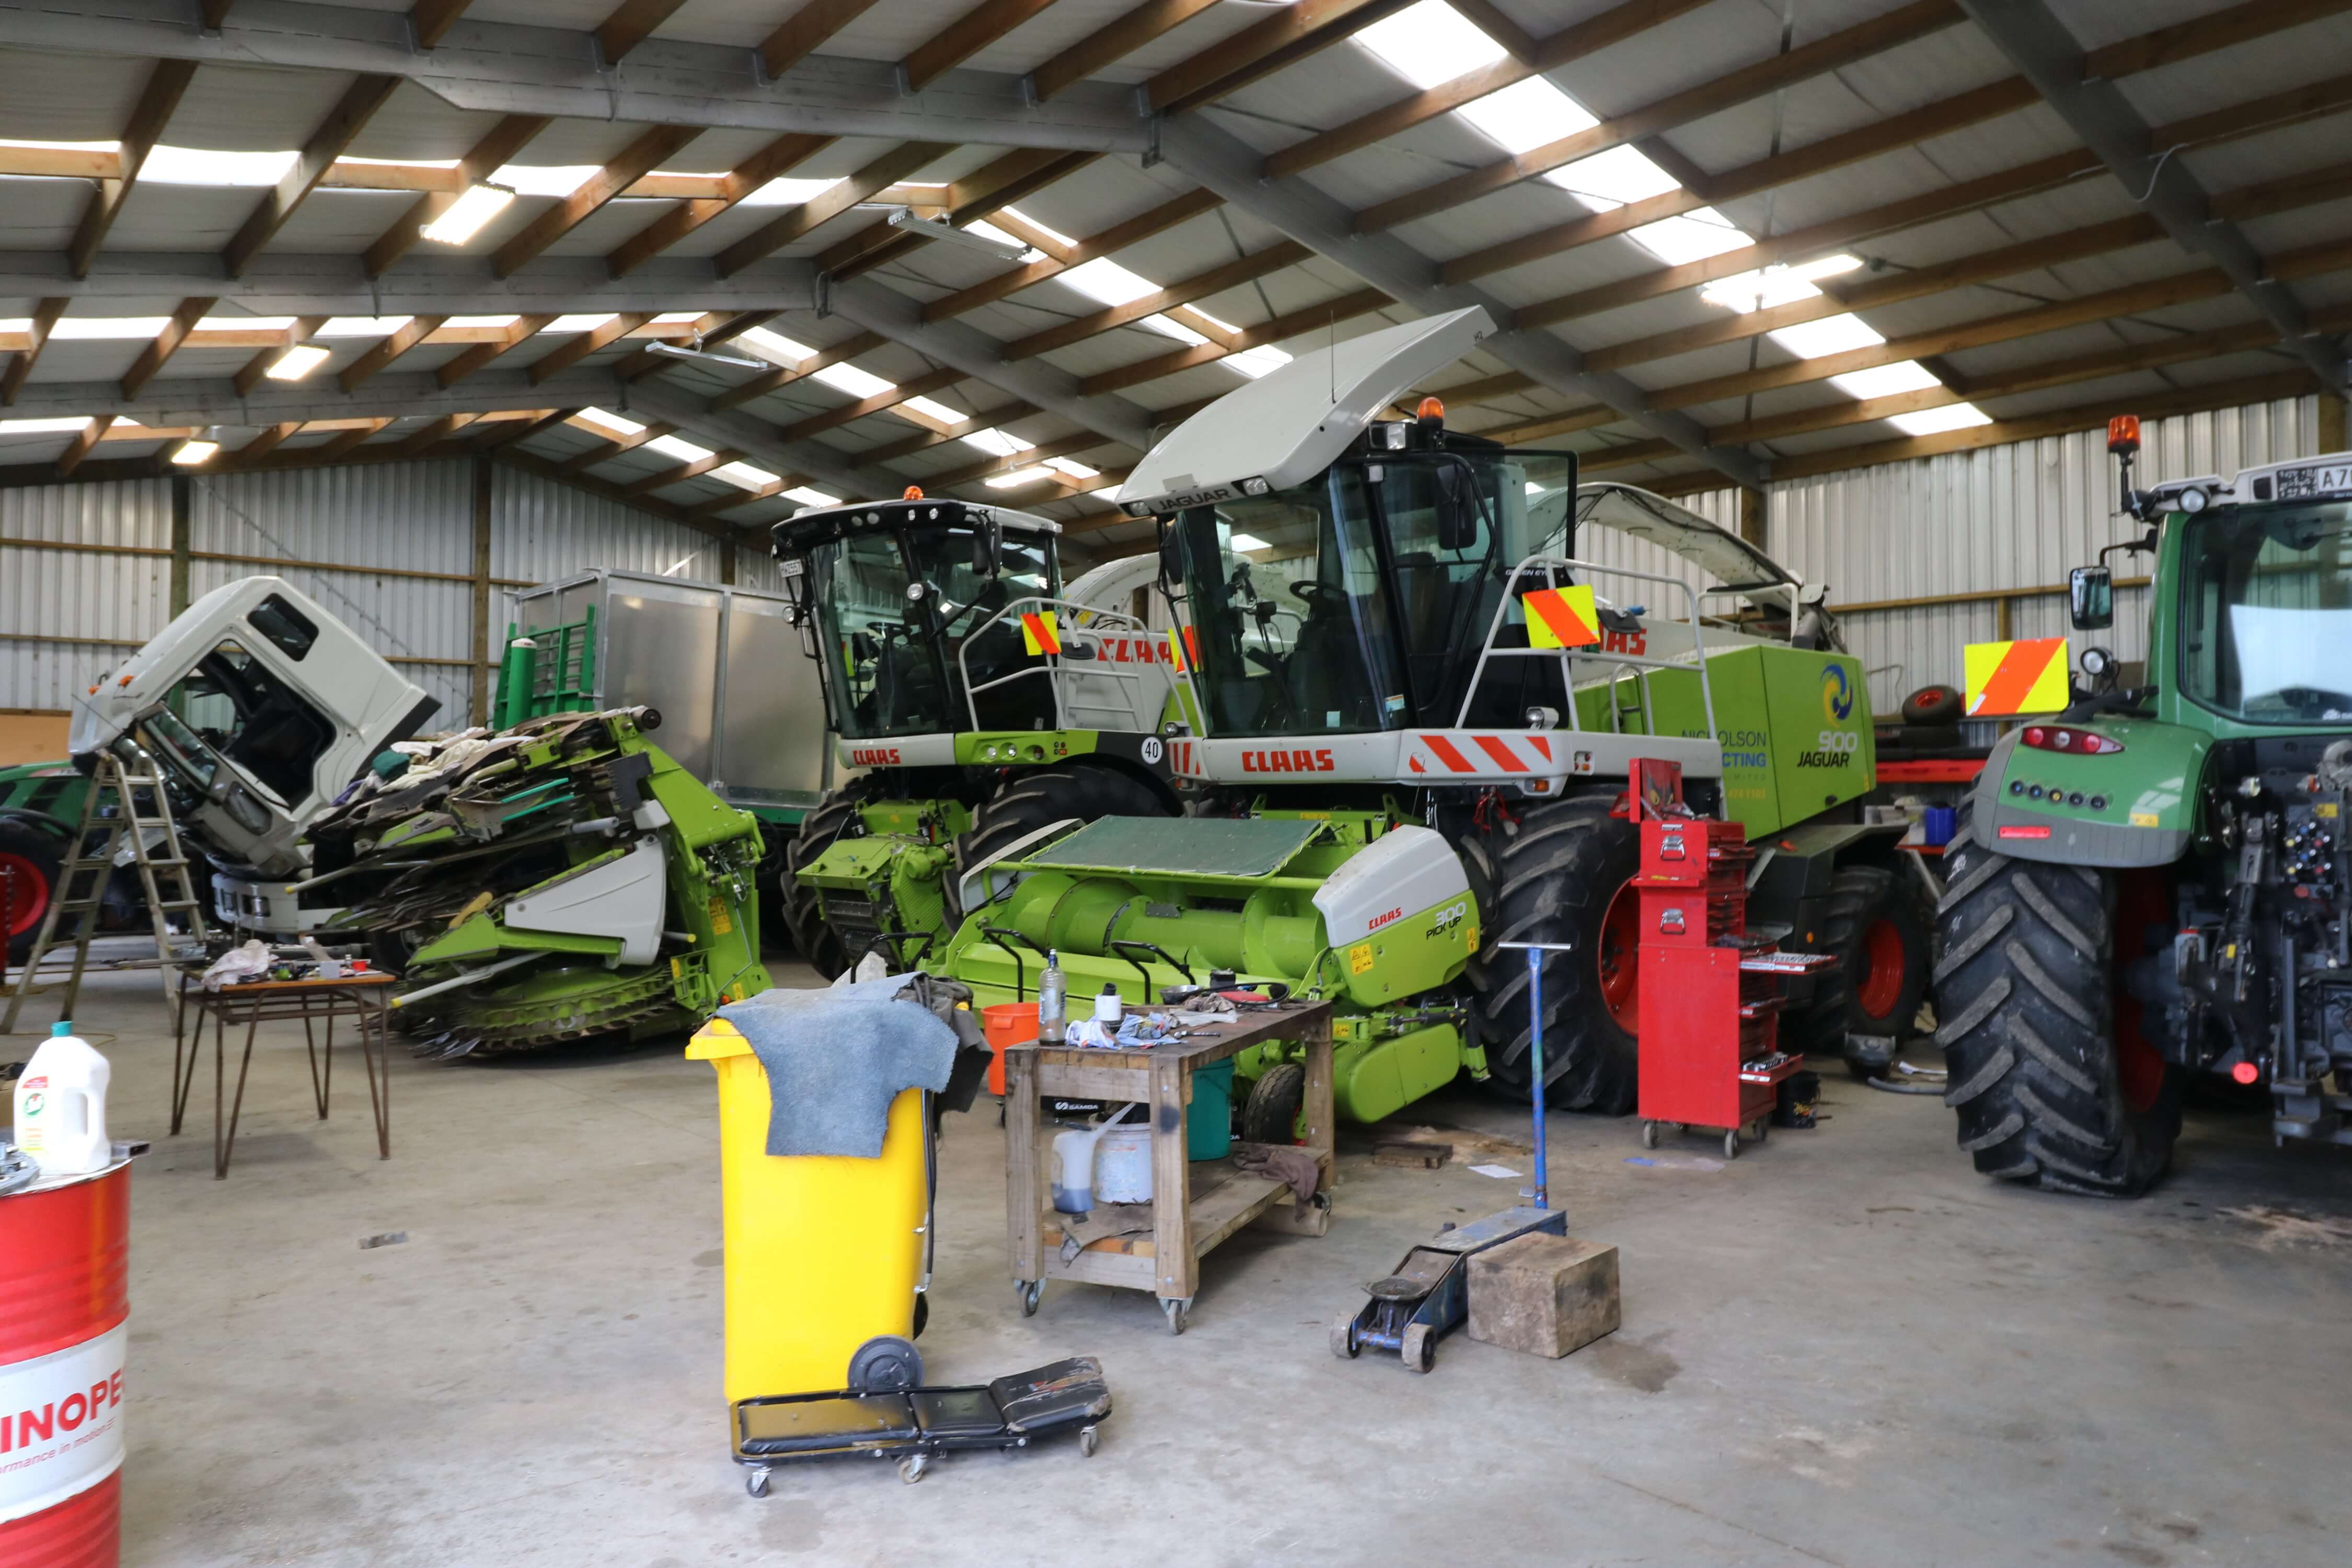 Looking for a place to store your farm equipment? Our large farm buildings are the perfect solution